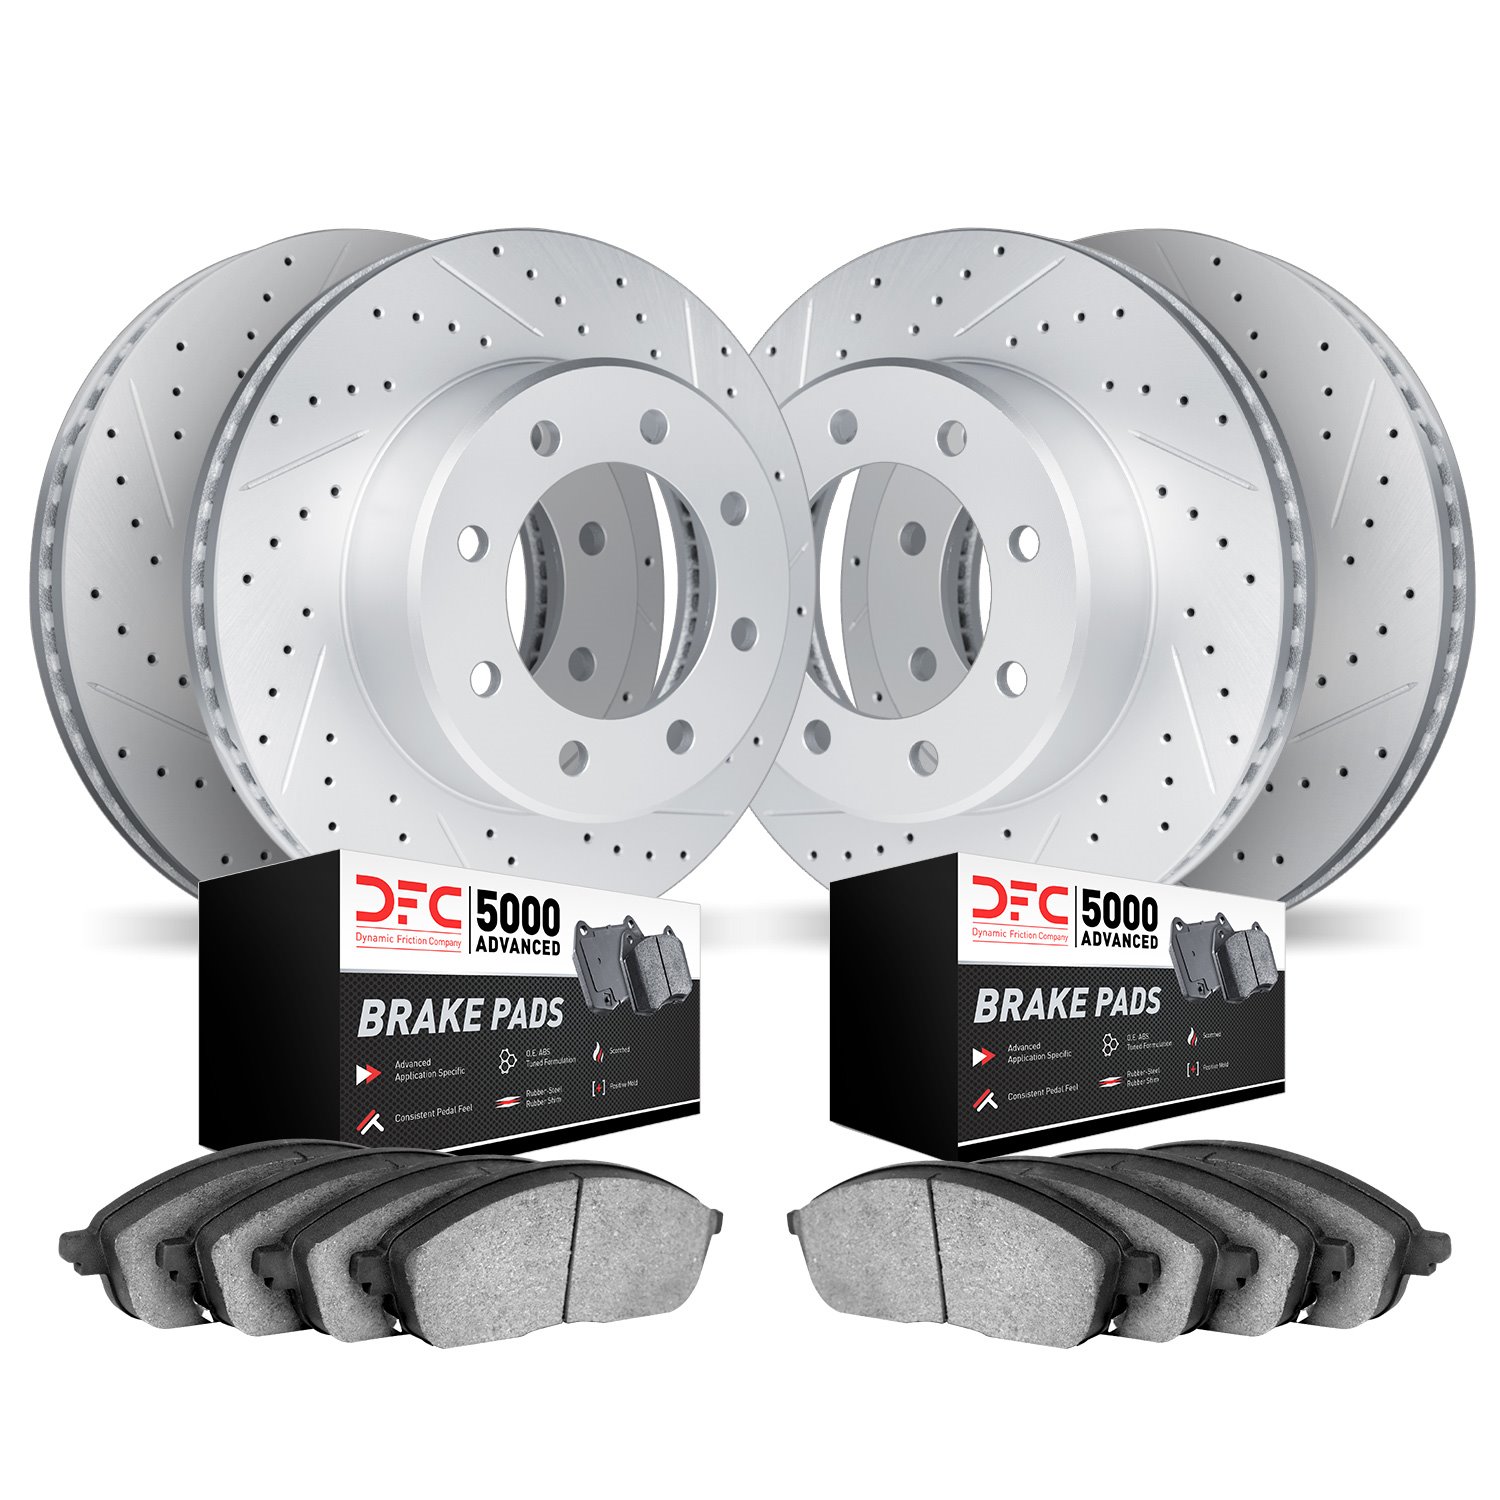 2504-54281 Geoperformance Drilled/Slotted Rotors w/5000 Advanced Brake Pads Kit, 2006-2010 Ford/Lincoln/Mercury/Mazda, Position: